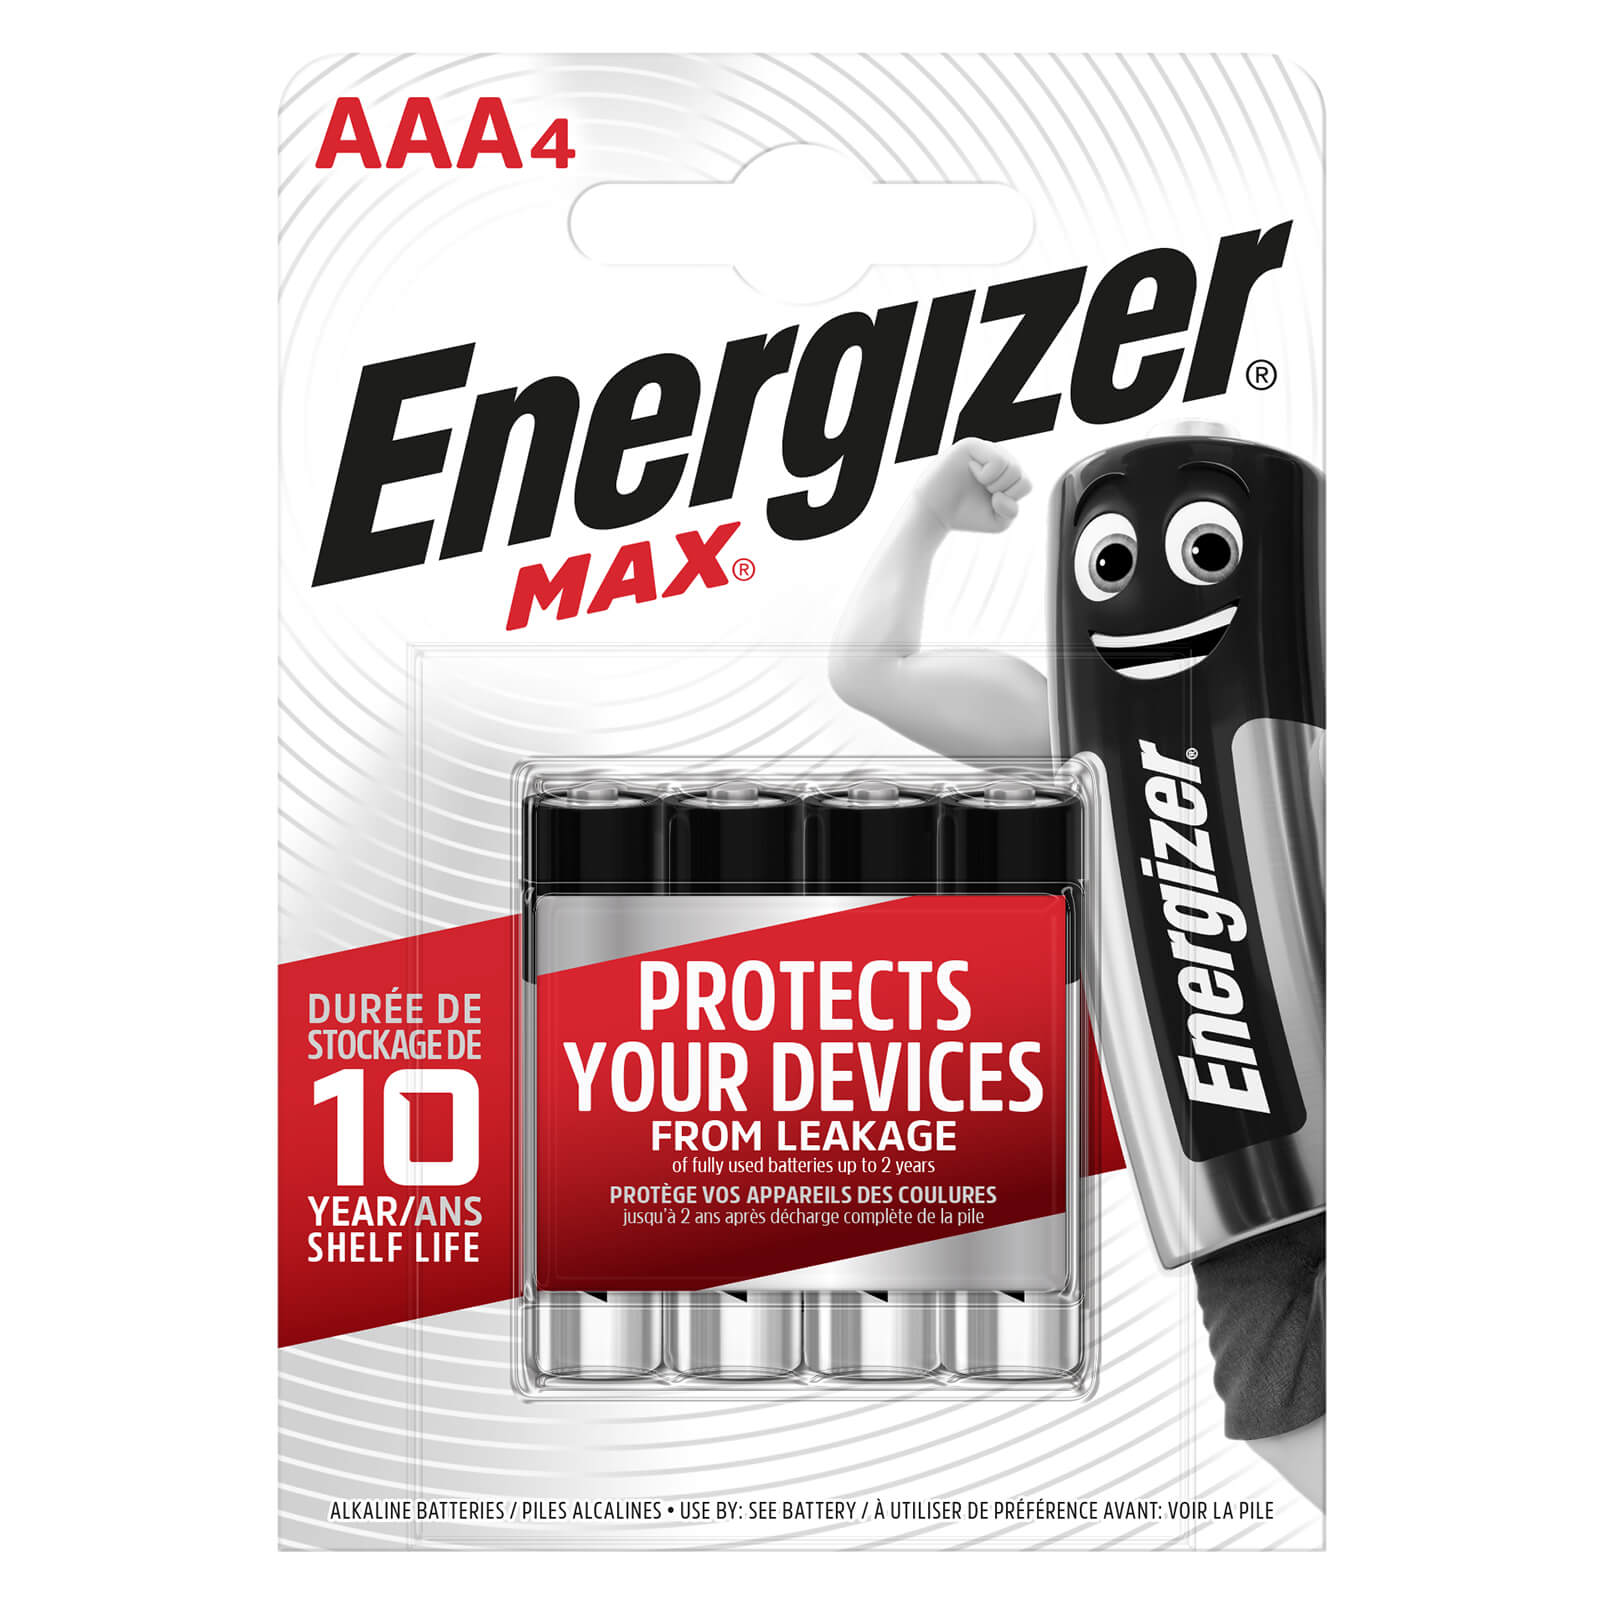 Photo of Energizer Max Alkaline Aaa Batteries - 4 Pack